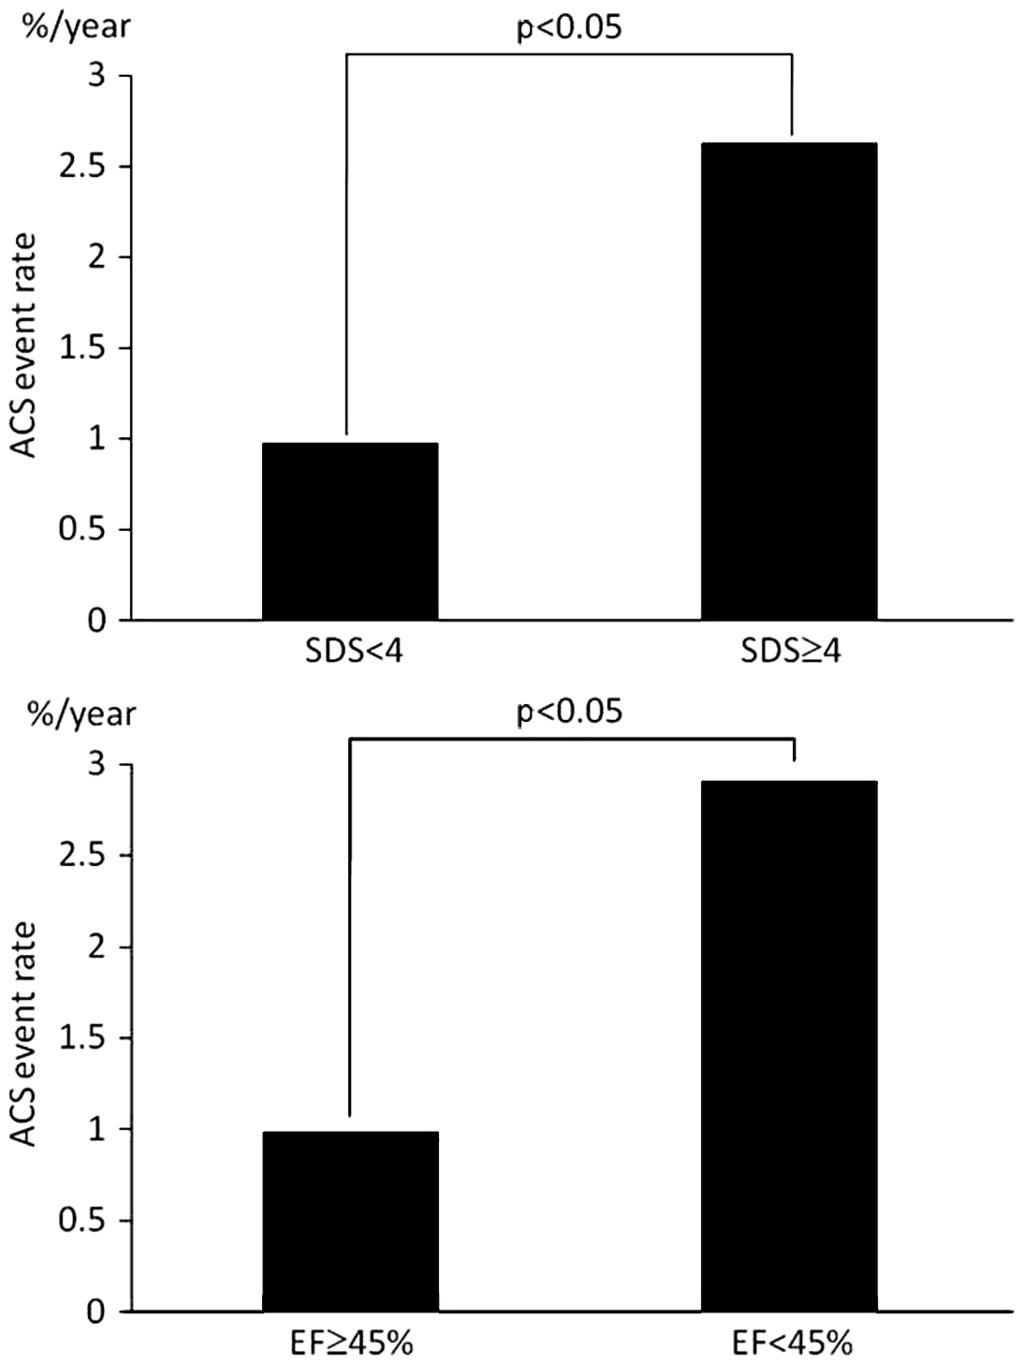 Prognostic Value of ECG-Gated SPECT for ACS Advance Publication by J-STAGE Table 1 Patient Characteristics Total Exercise Pharmacological stress (n=1,753) (n=837) (n=916) p value Male 1,218 (69.